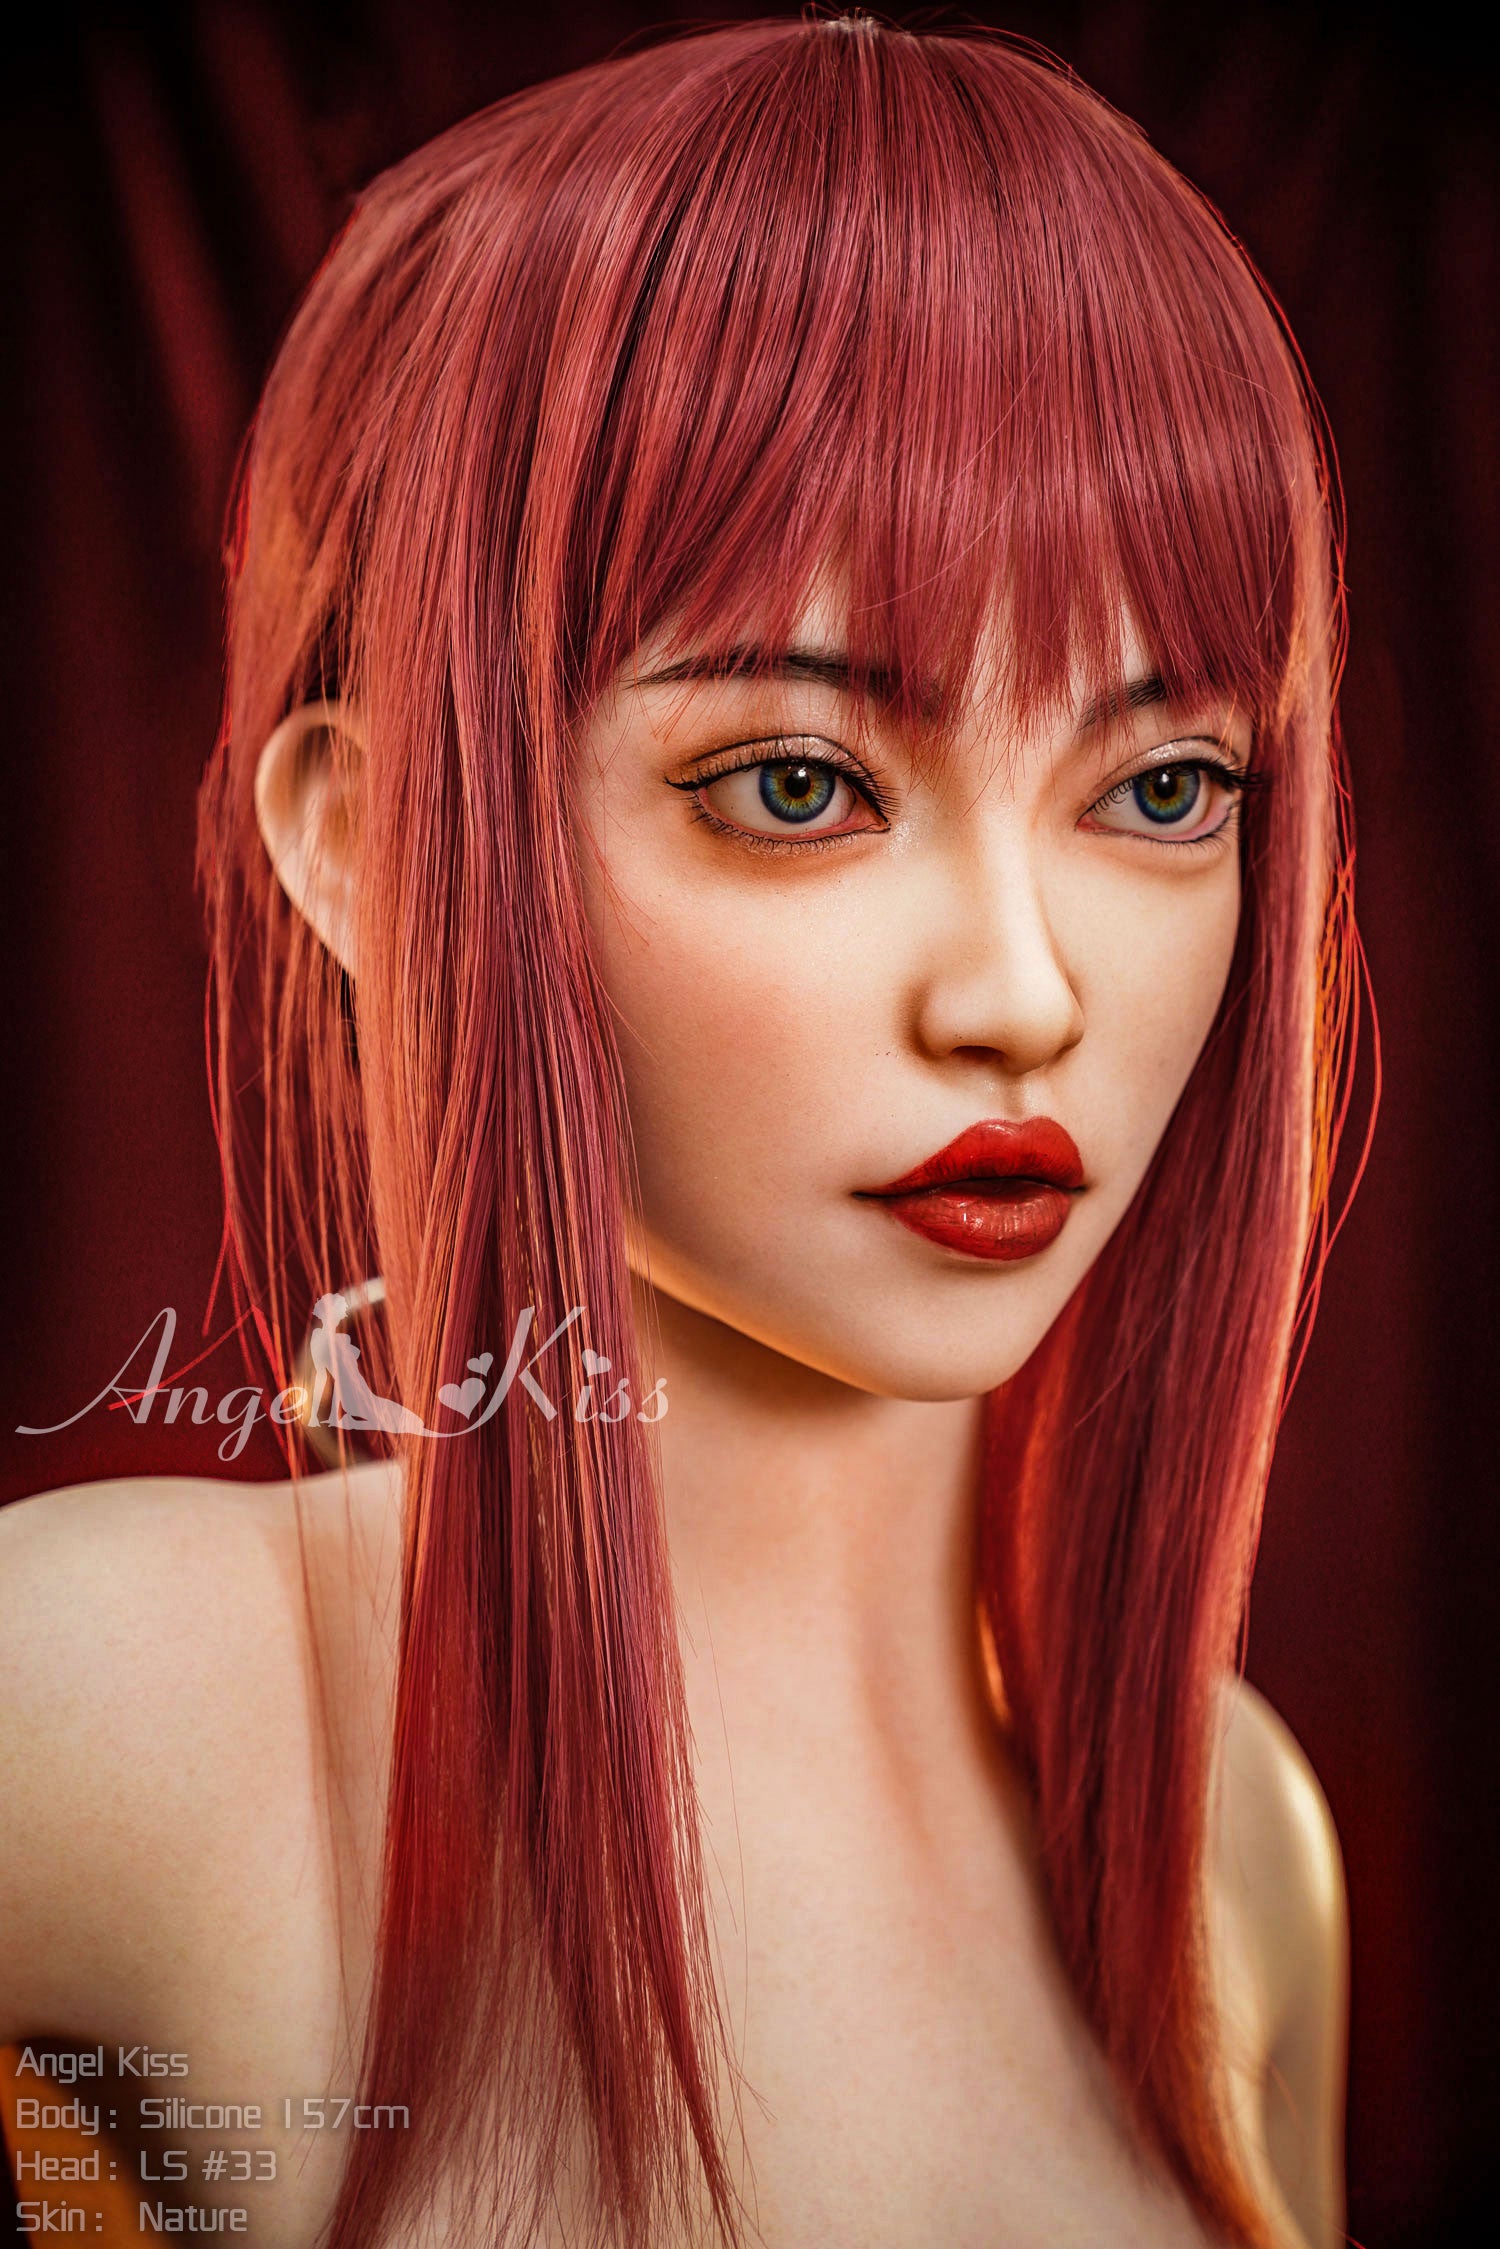 Angelkiss Doll 157 cm Silicone - Yue | Buy Sex Dolls at DOLLS ACTUALLY